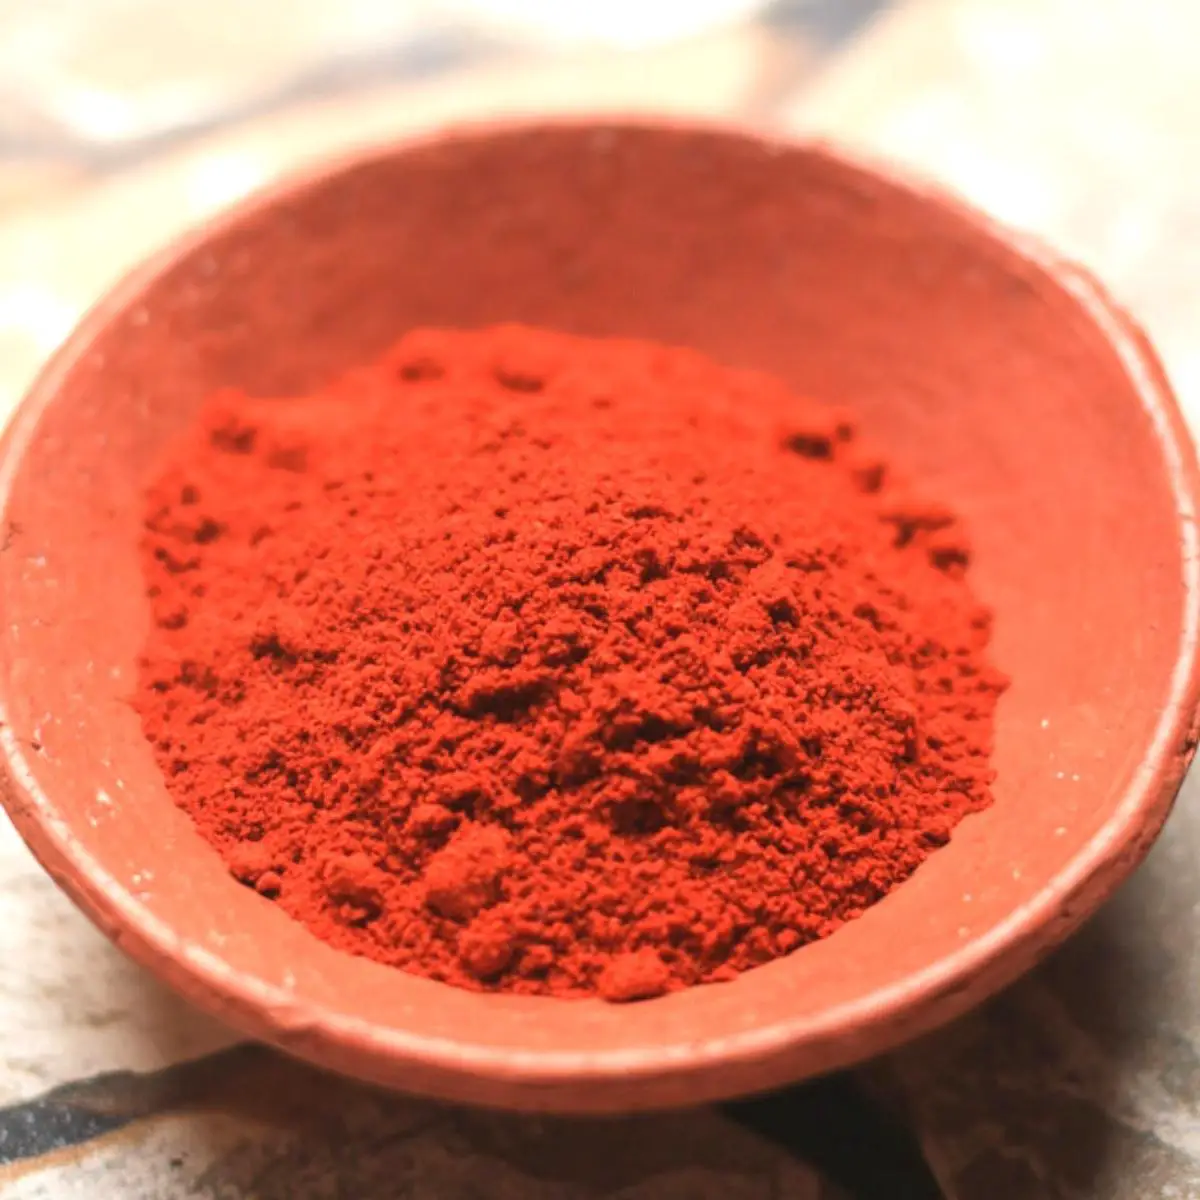 A bowl with bottle masala spice mix.